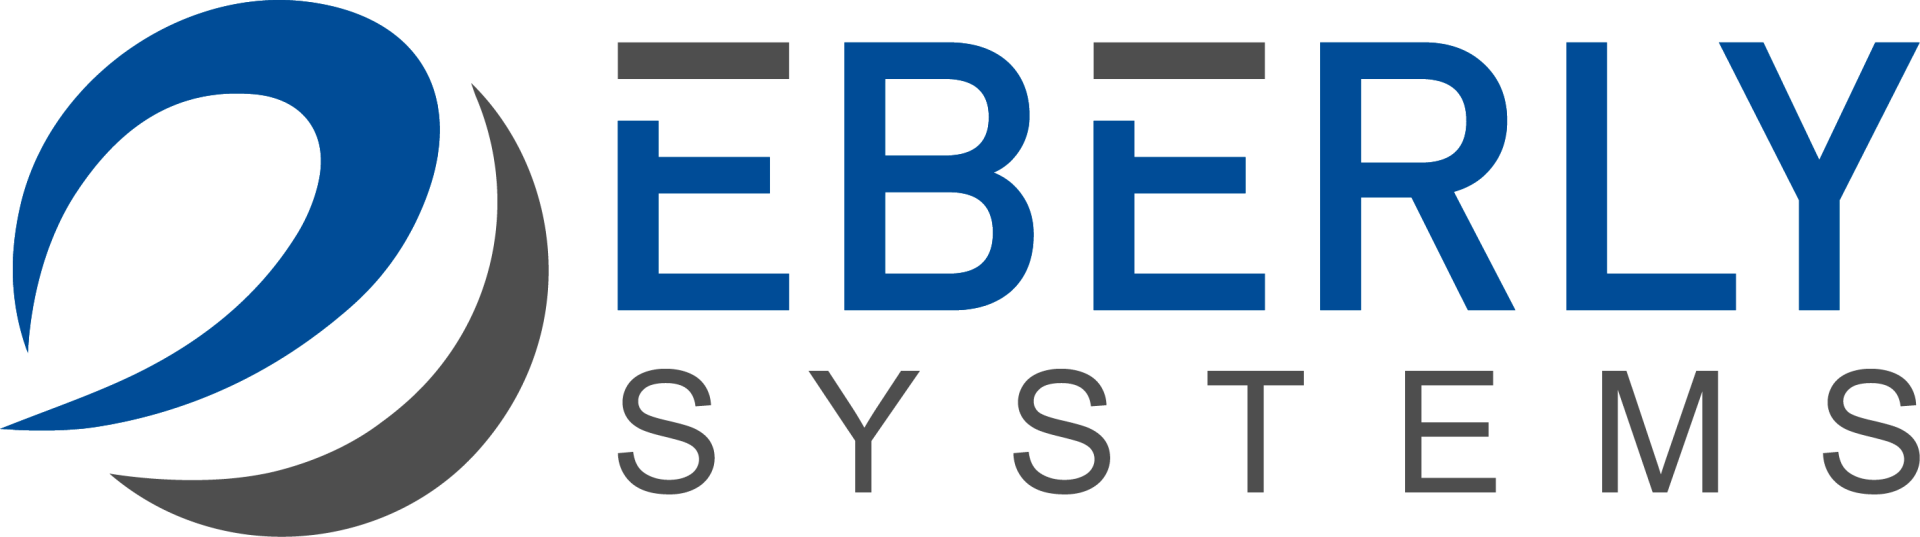 Eberly Systems, LLC - Your Managed IT Services Provider Serving Berks, Lancaster, Chester and Dauphin Counties and Clients Within an Hour's Drive of Reading, PA